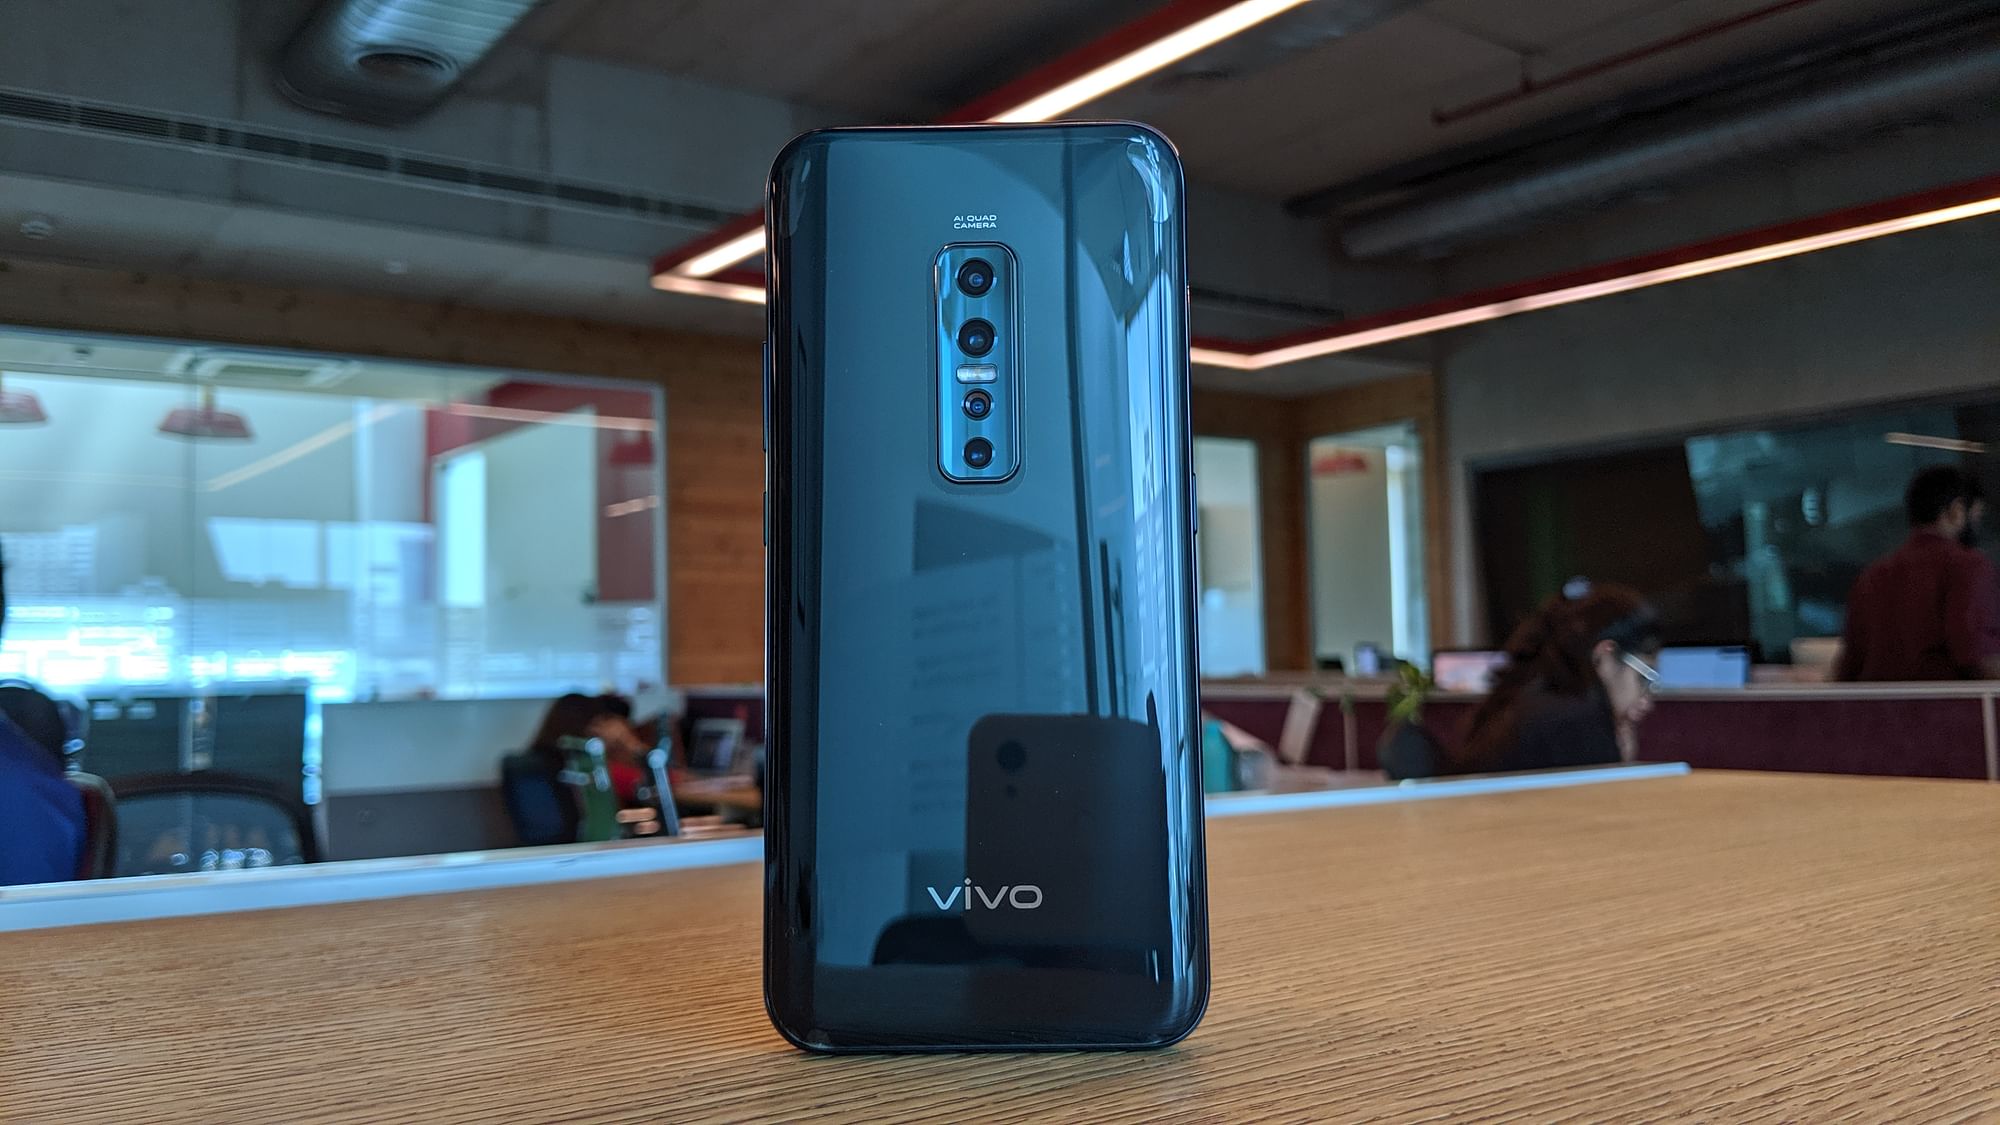 Vivo V17 Pro launched in India. Price and features released.